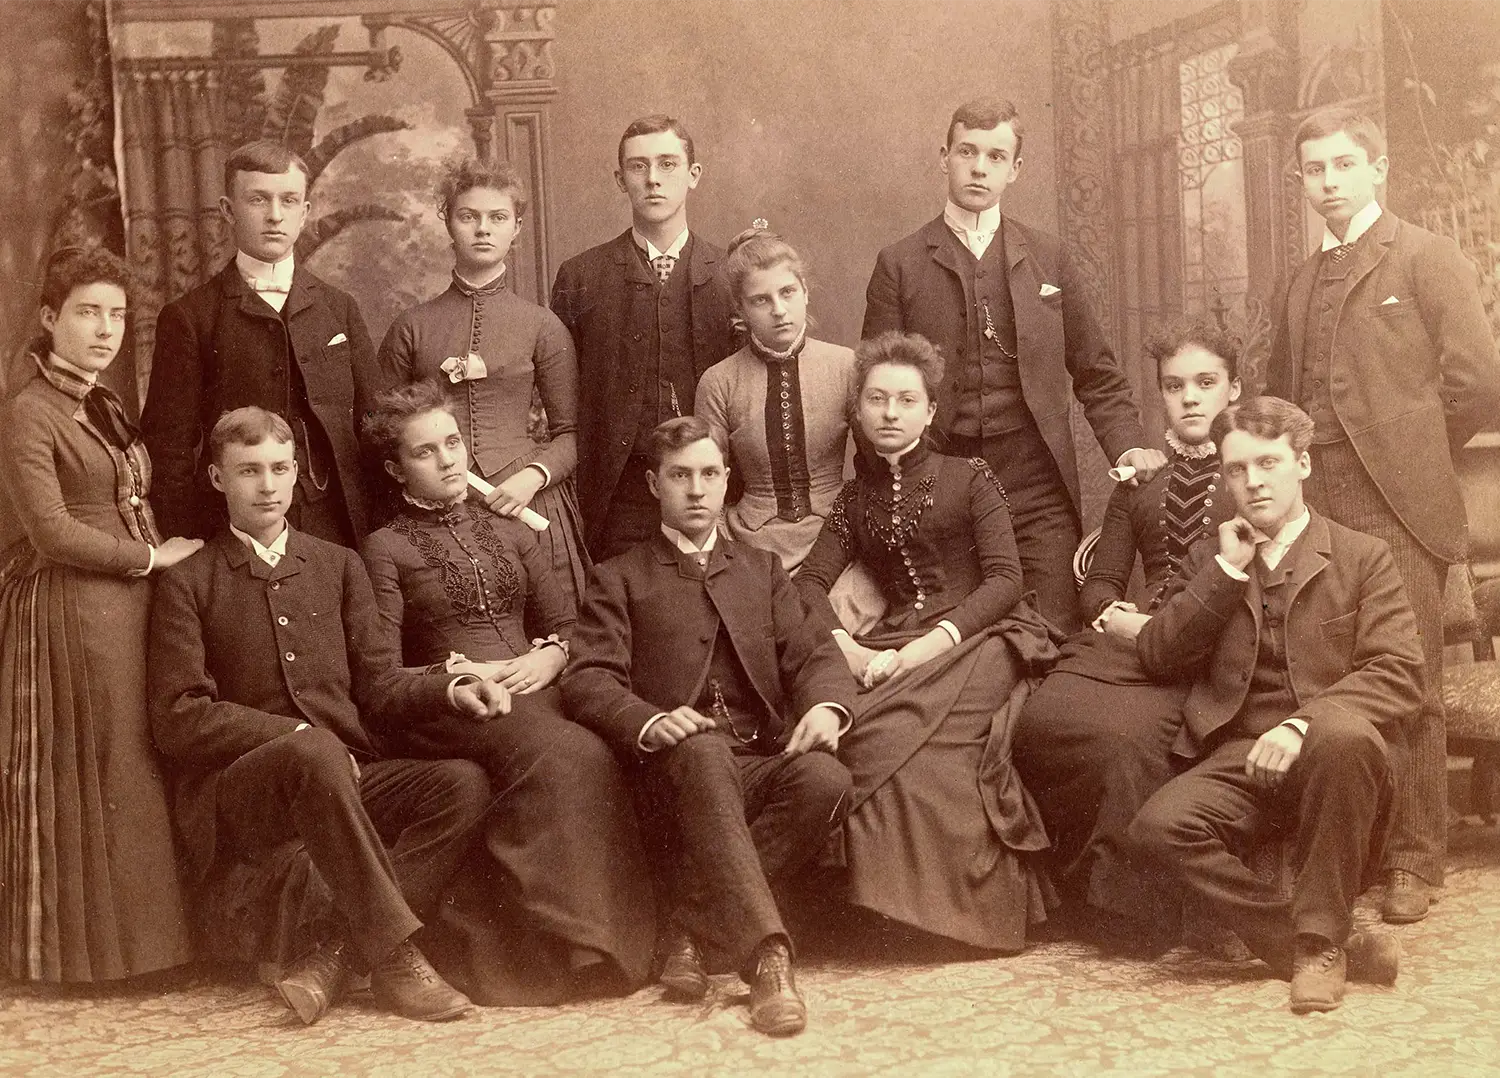 A group photo of men and women dressed in Victorian-era formal attire.